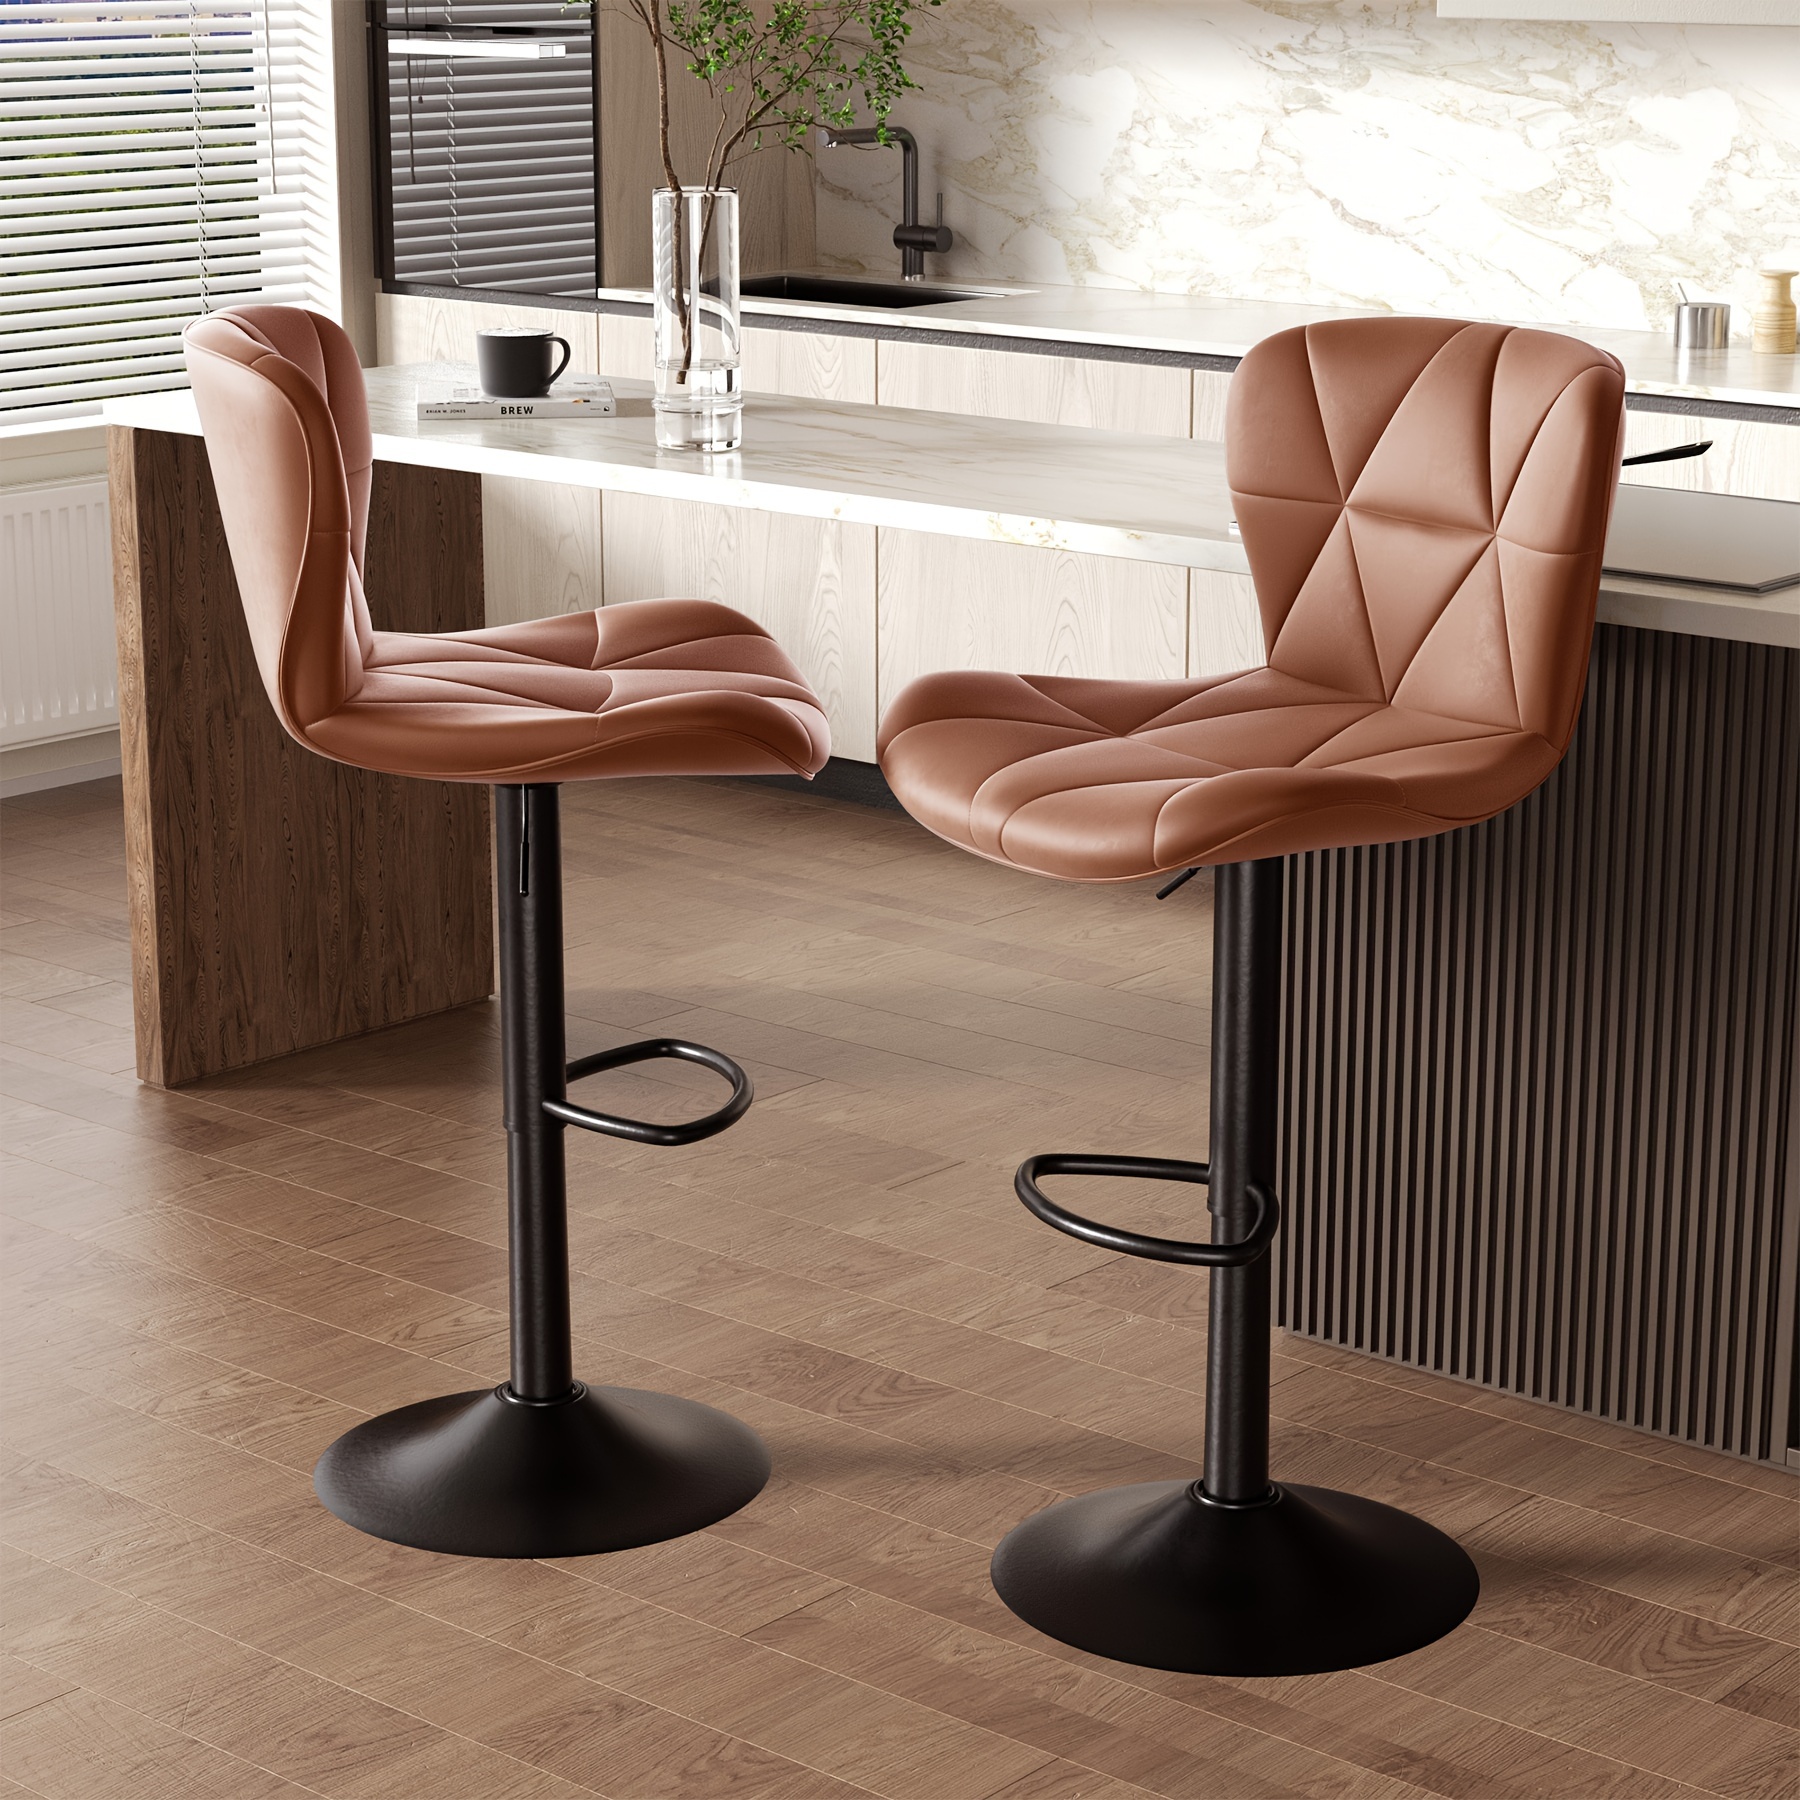 

Adjustable Faux Leather Upholstered Swivel Counter Stools, Counter Height Barstools With Back For Kitchen Island